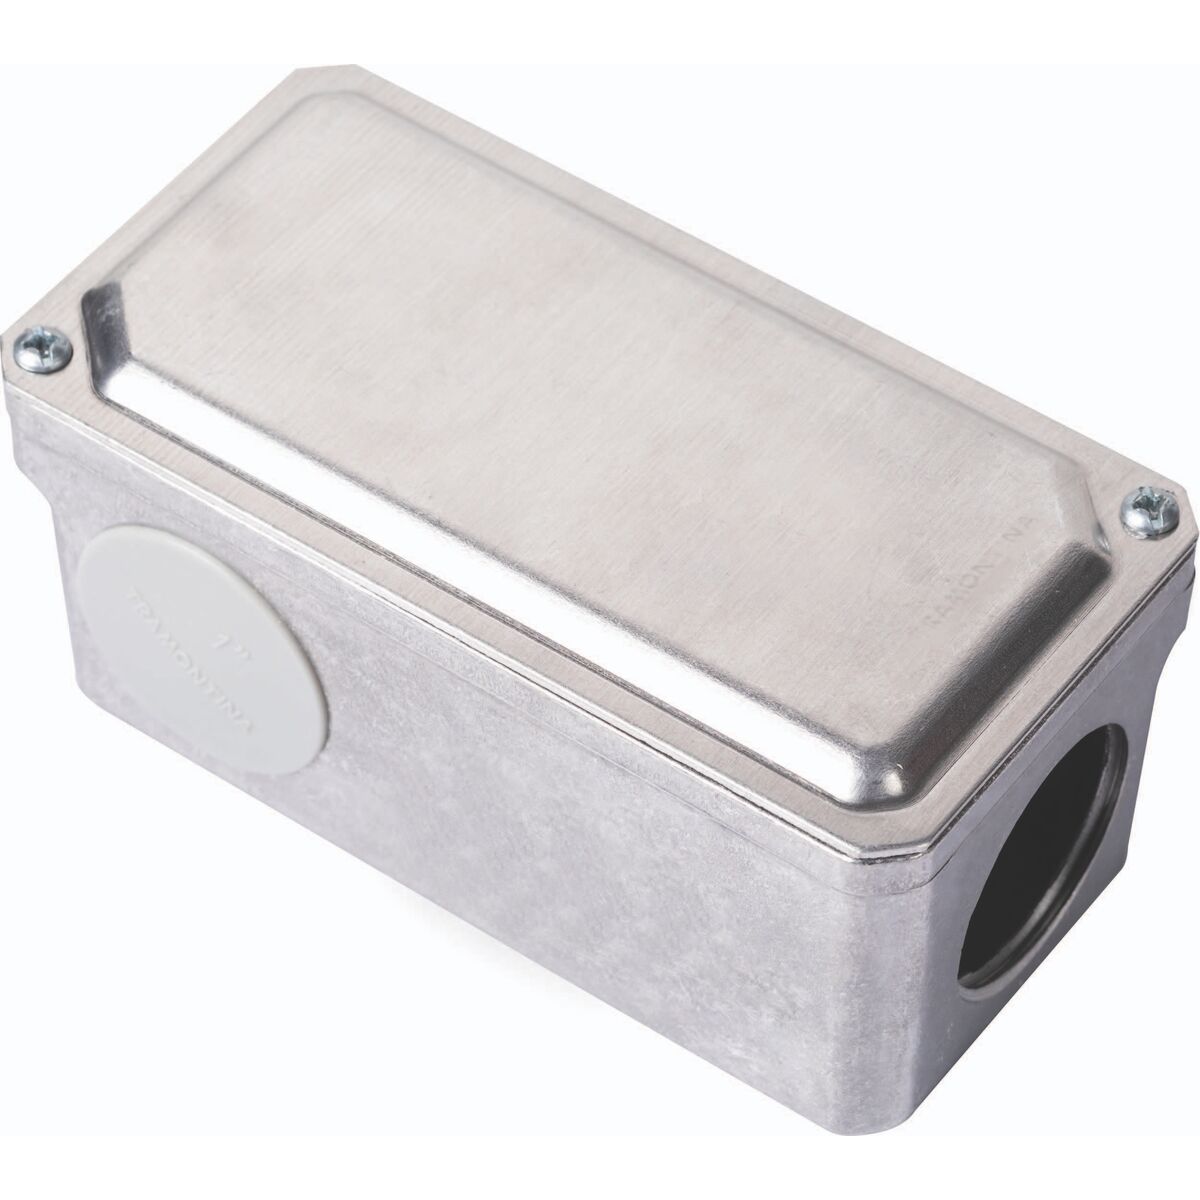 
Tramontina 1" L-Type Multiple Conduit Box with Cover
